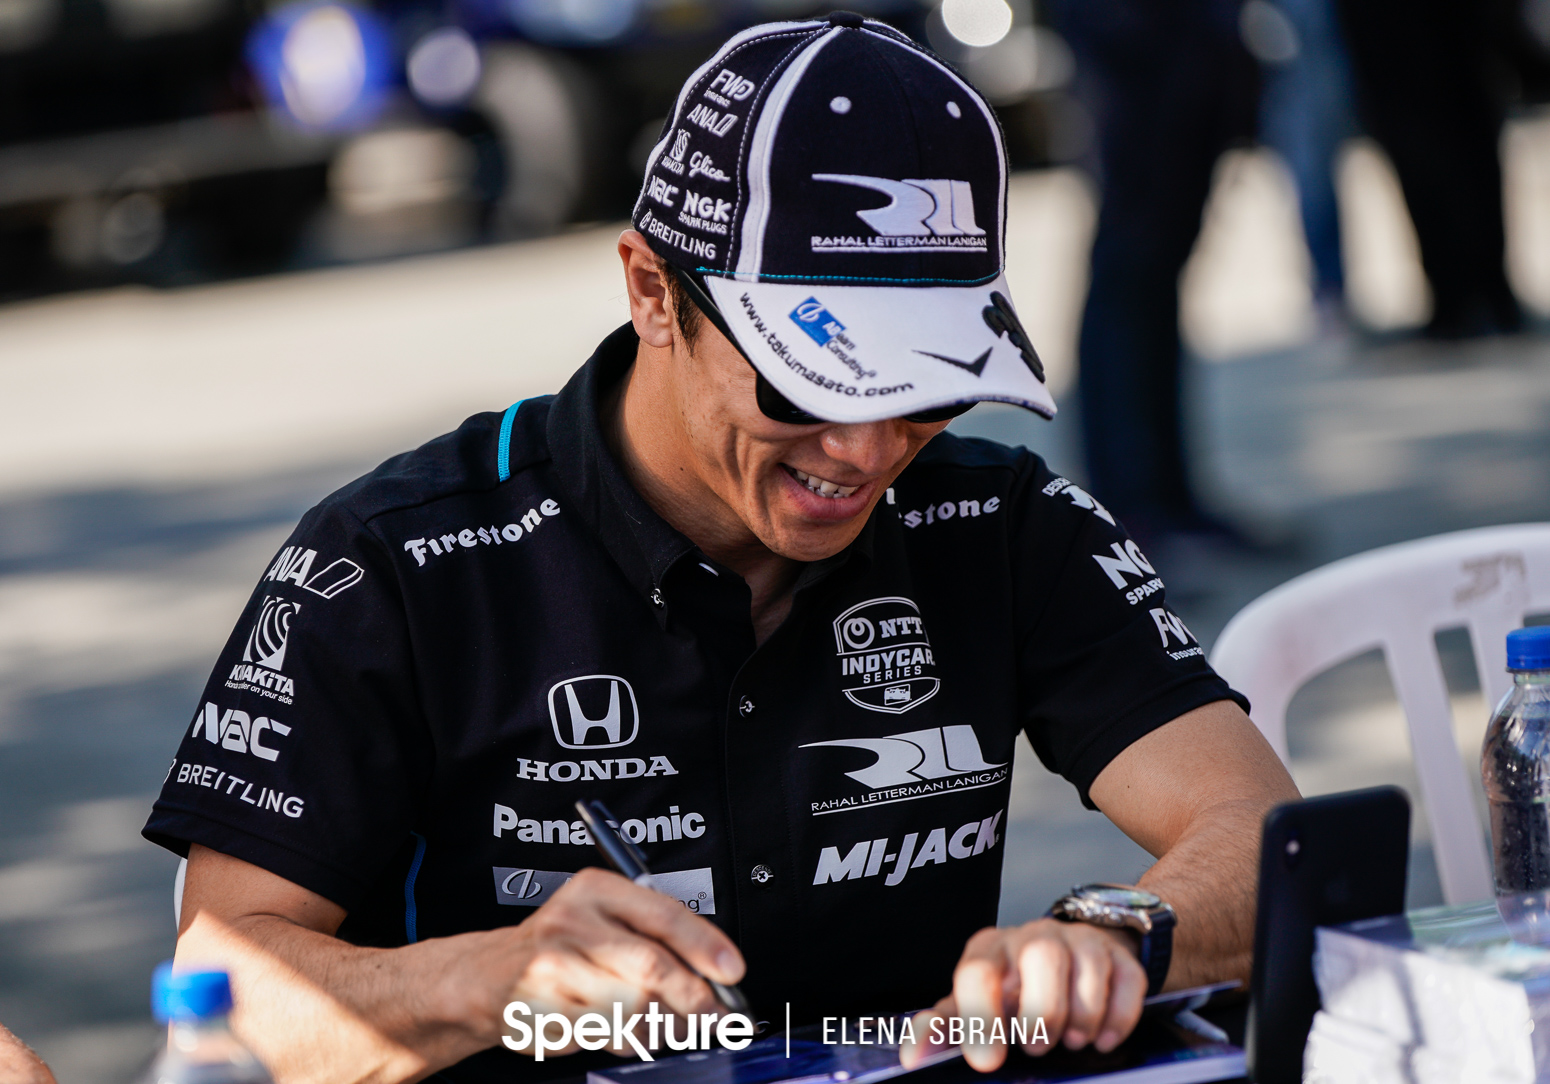 Earchphoto Sports - Takuma Sato signs autographs for the fans at IMS